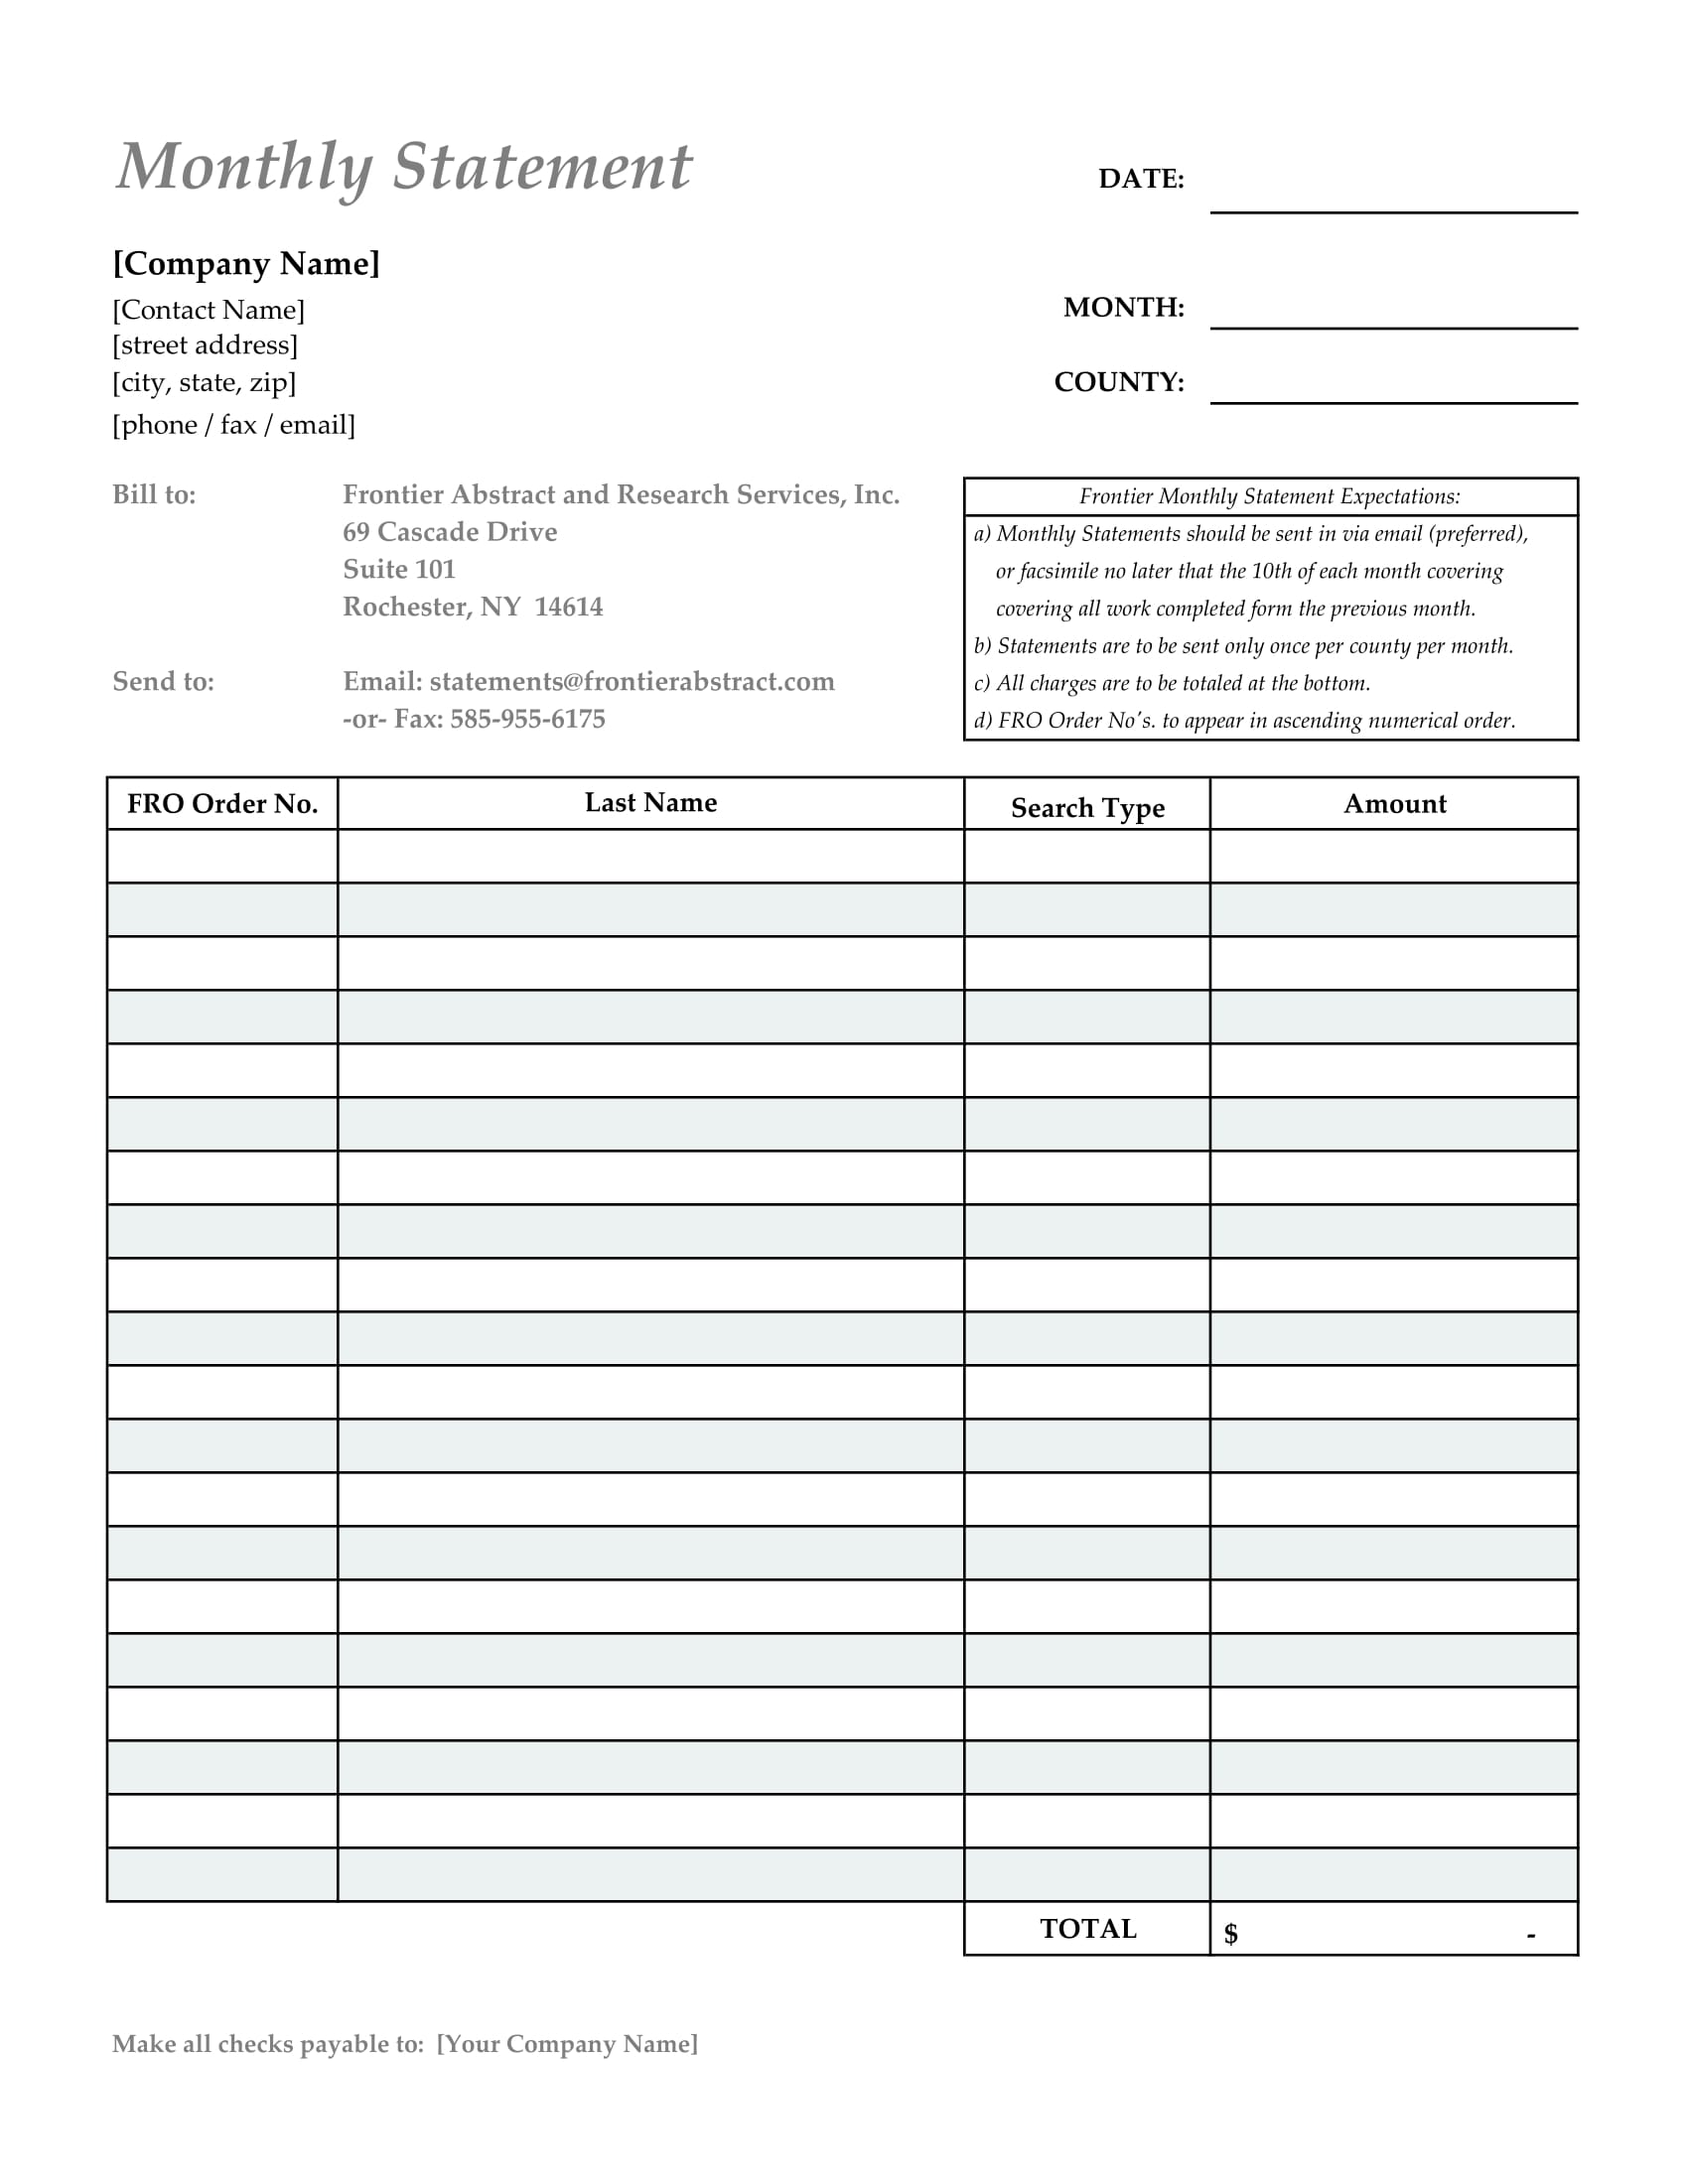 monthly billing statement form 1